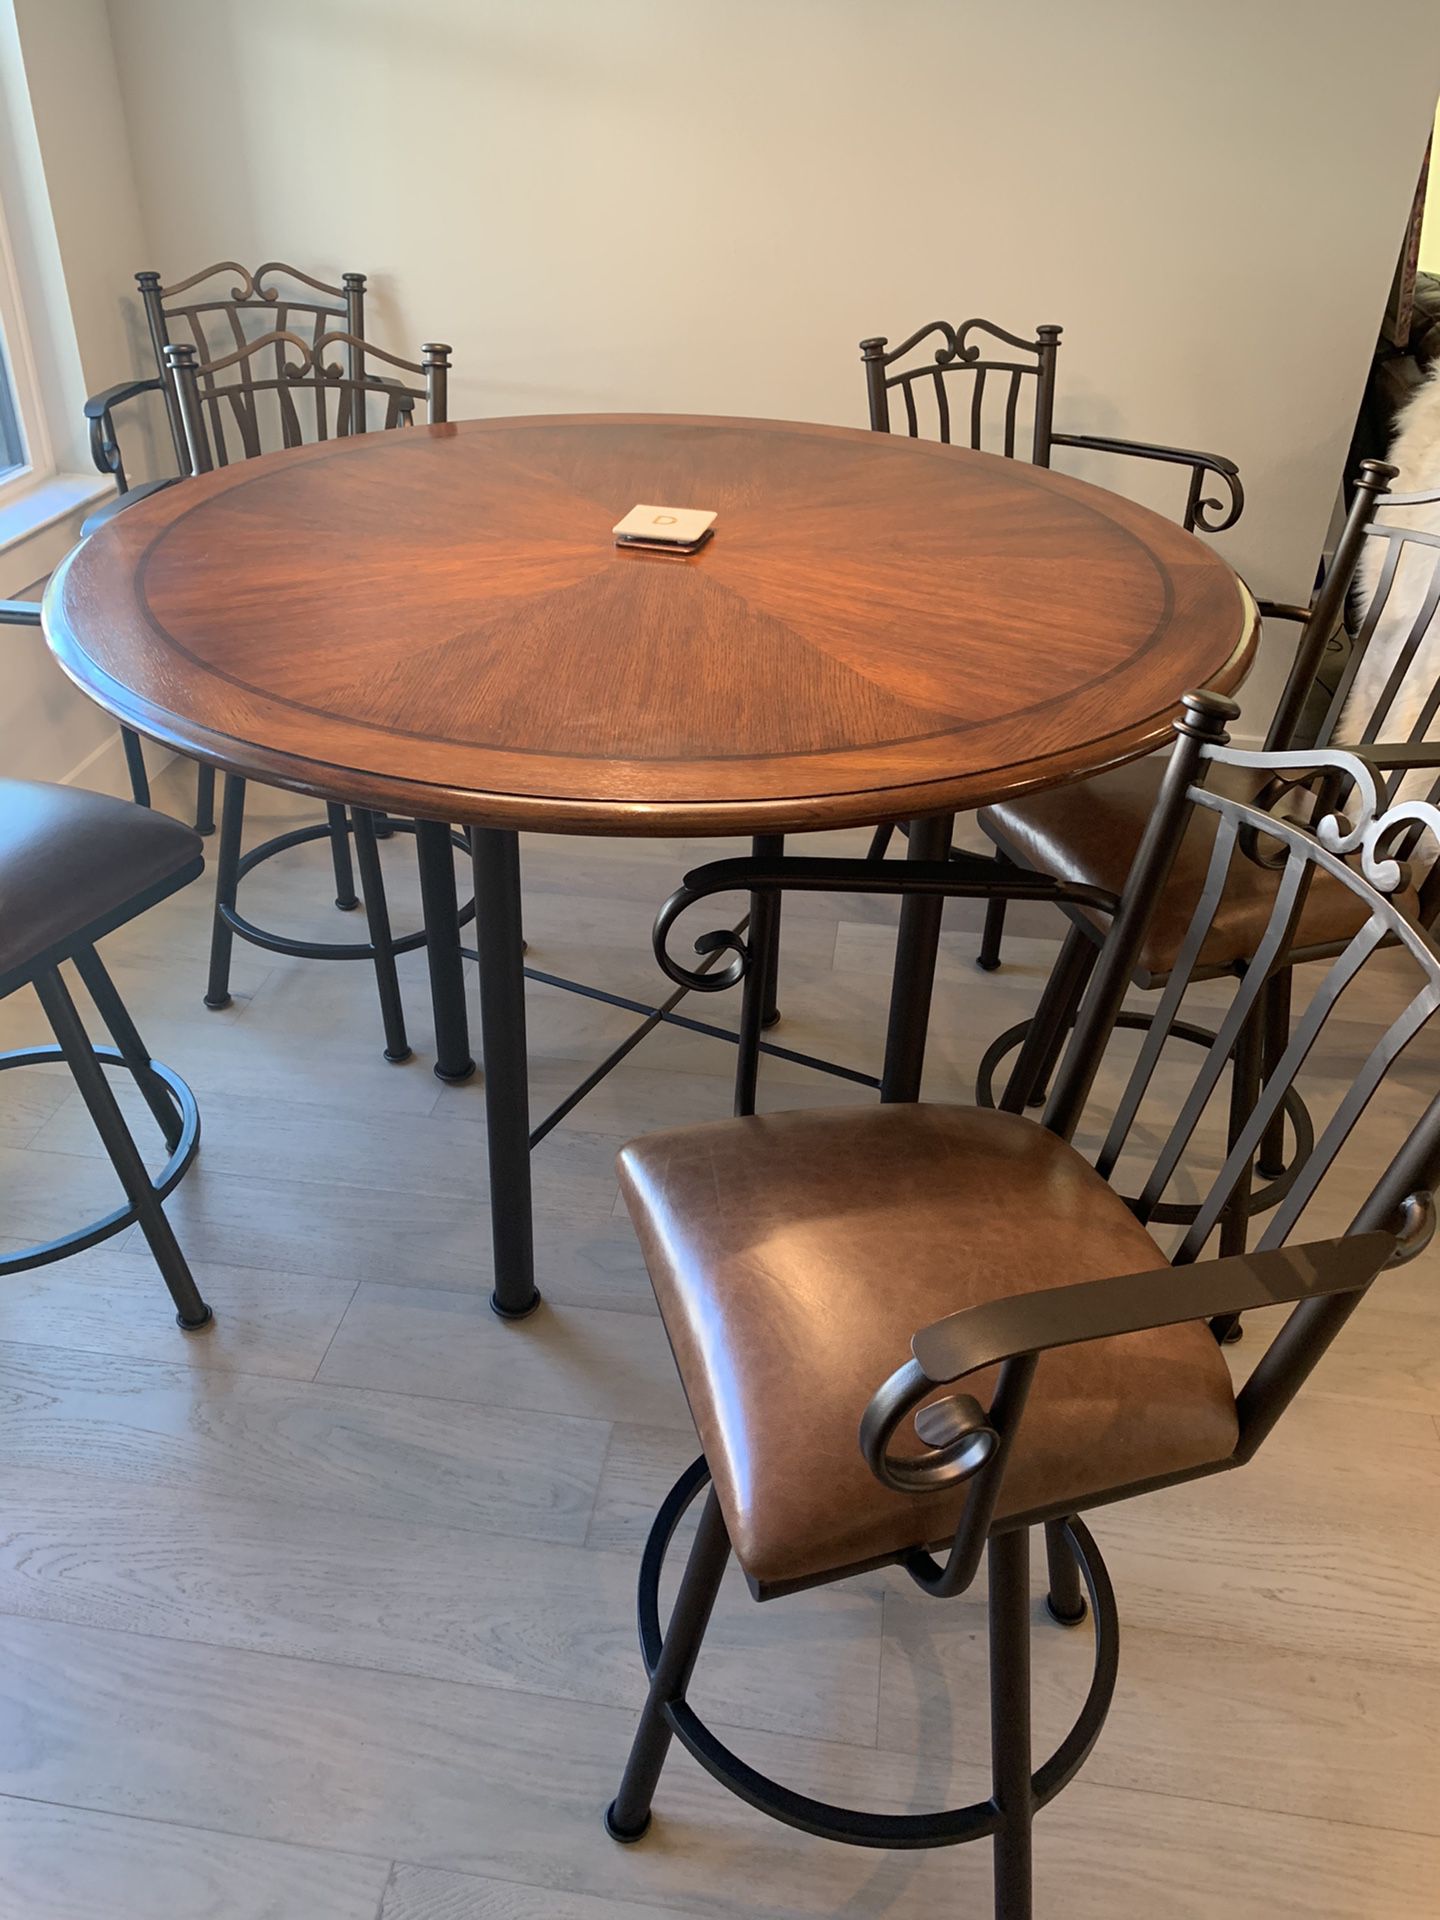 Dining Room Table -Wooden with 6 swivel chairs